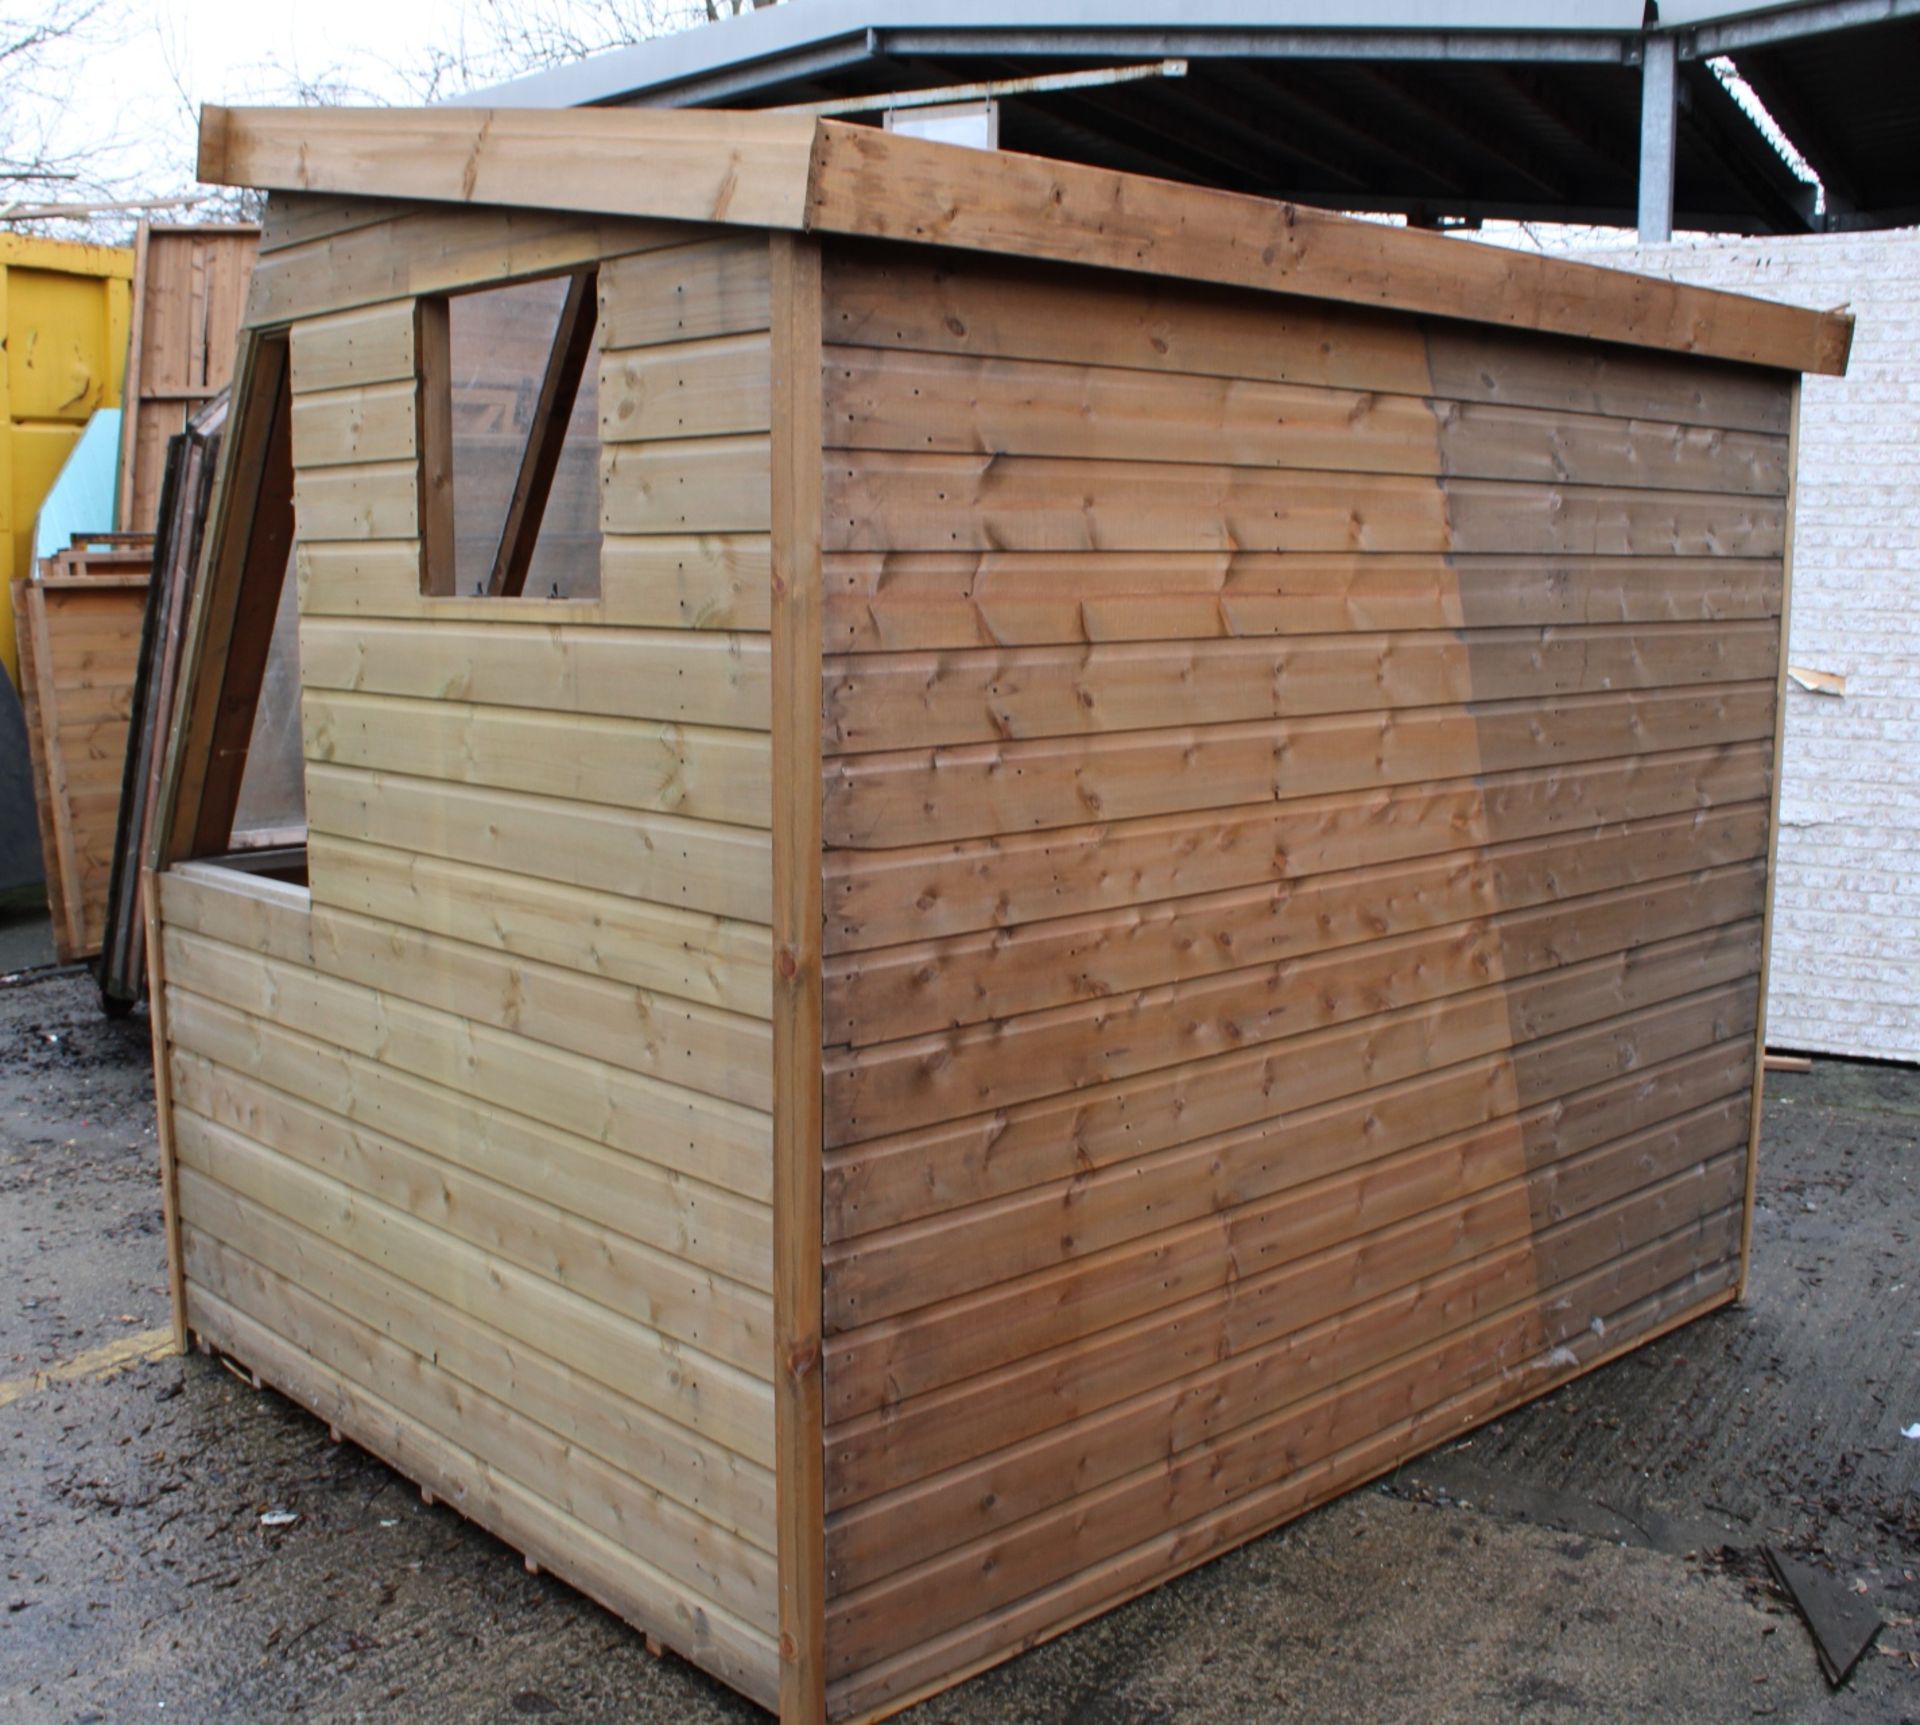 8x6 Exdisplay potting shed, Standard 16mm Nominal Cladding RRP£1,500 - Image 4 of 5